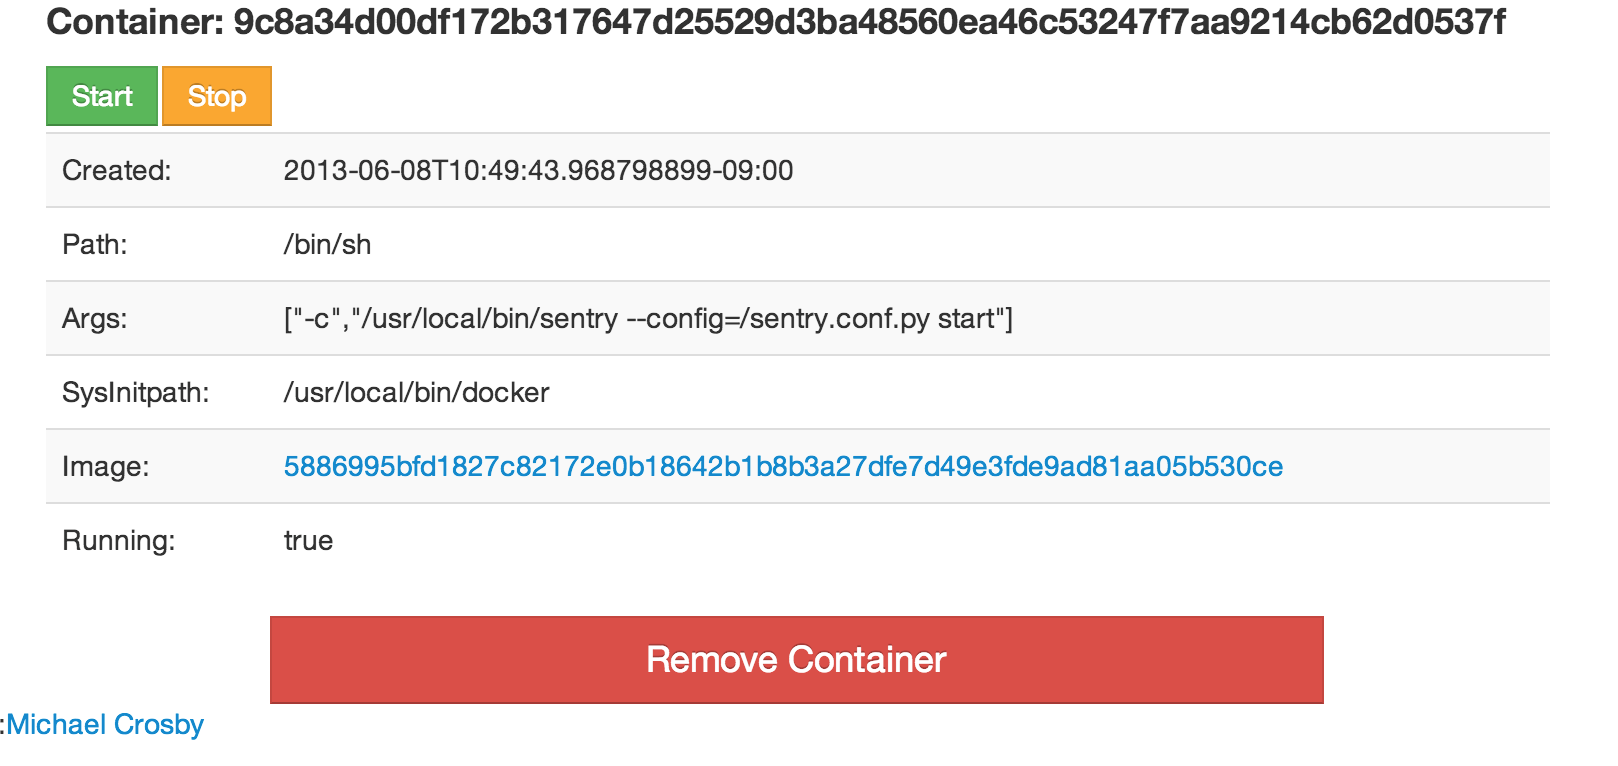 https://raw.githubusercontent.com/kevana/ui-for-docker/master/container.png